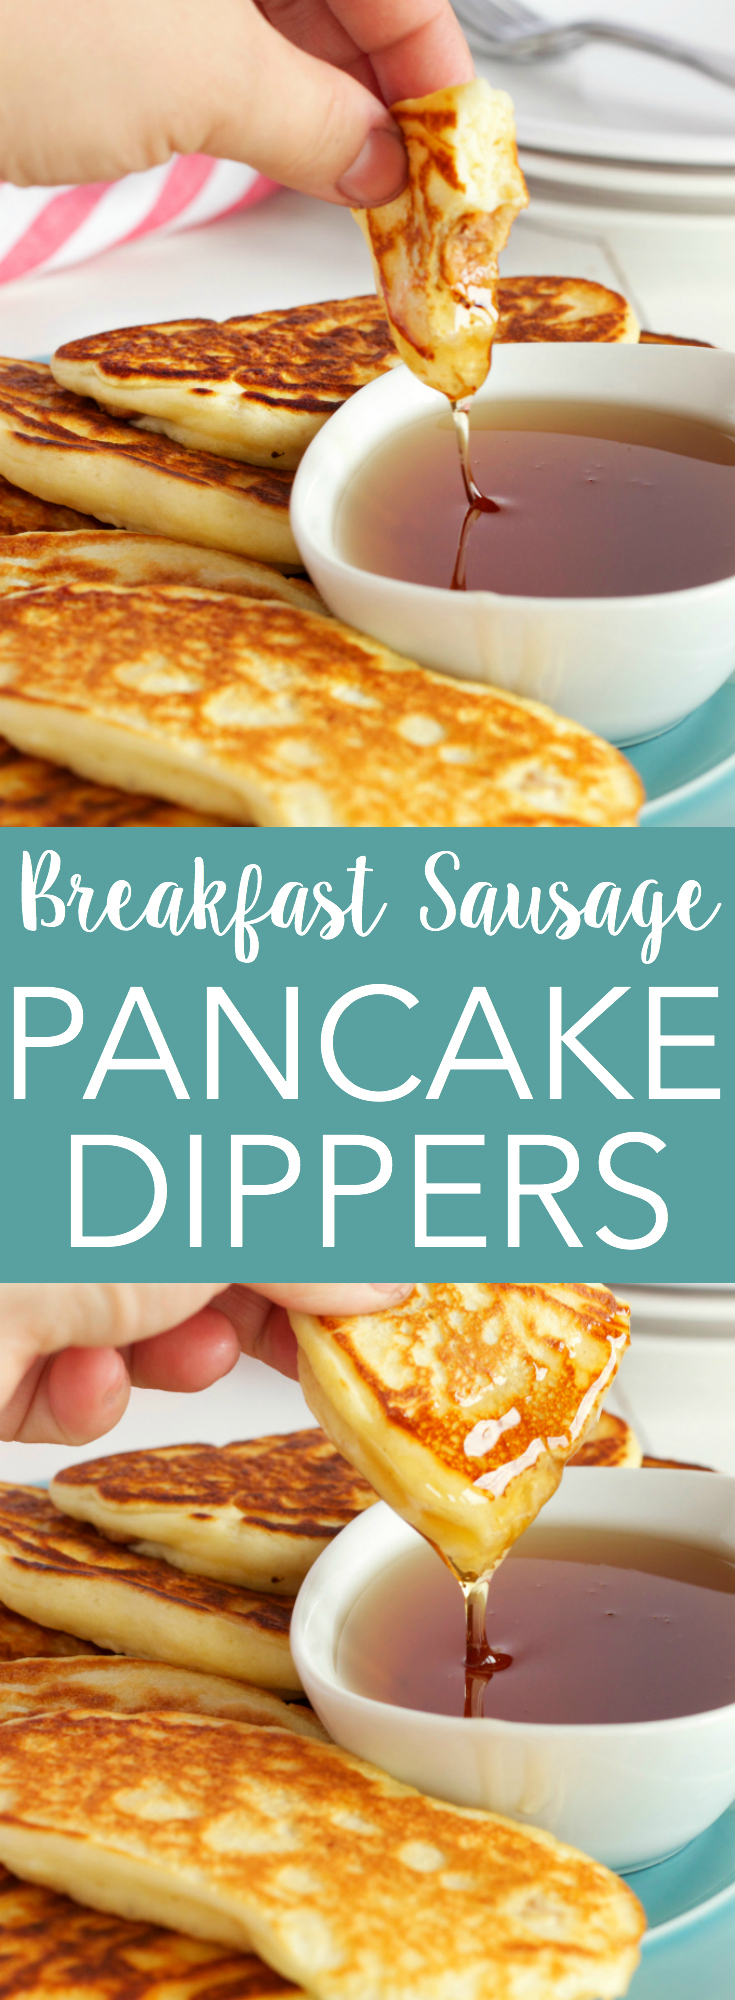 These Breakfast Sausage Pancake Dippers are the perfect breakfast finger food! Recipe from thebusybaker.ca! via @busybakerblog